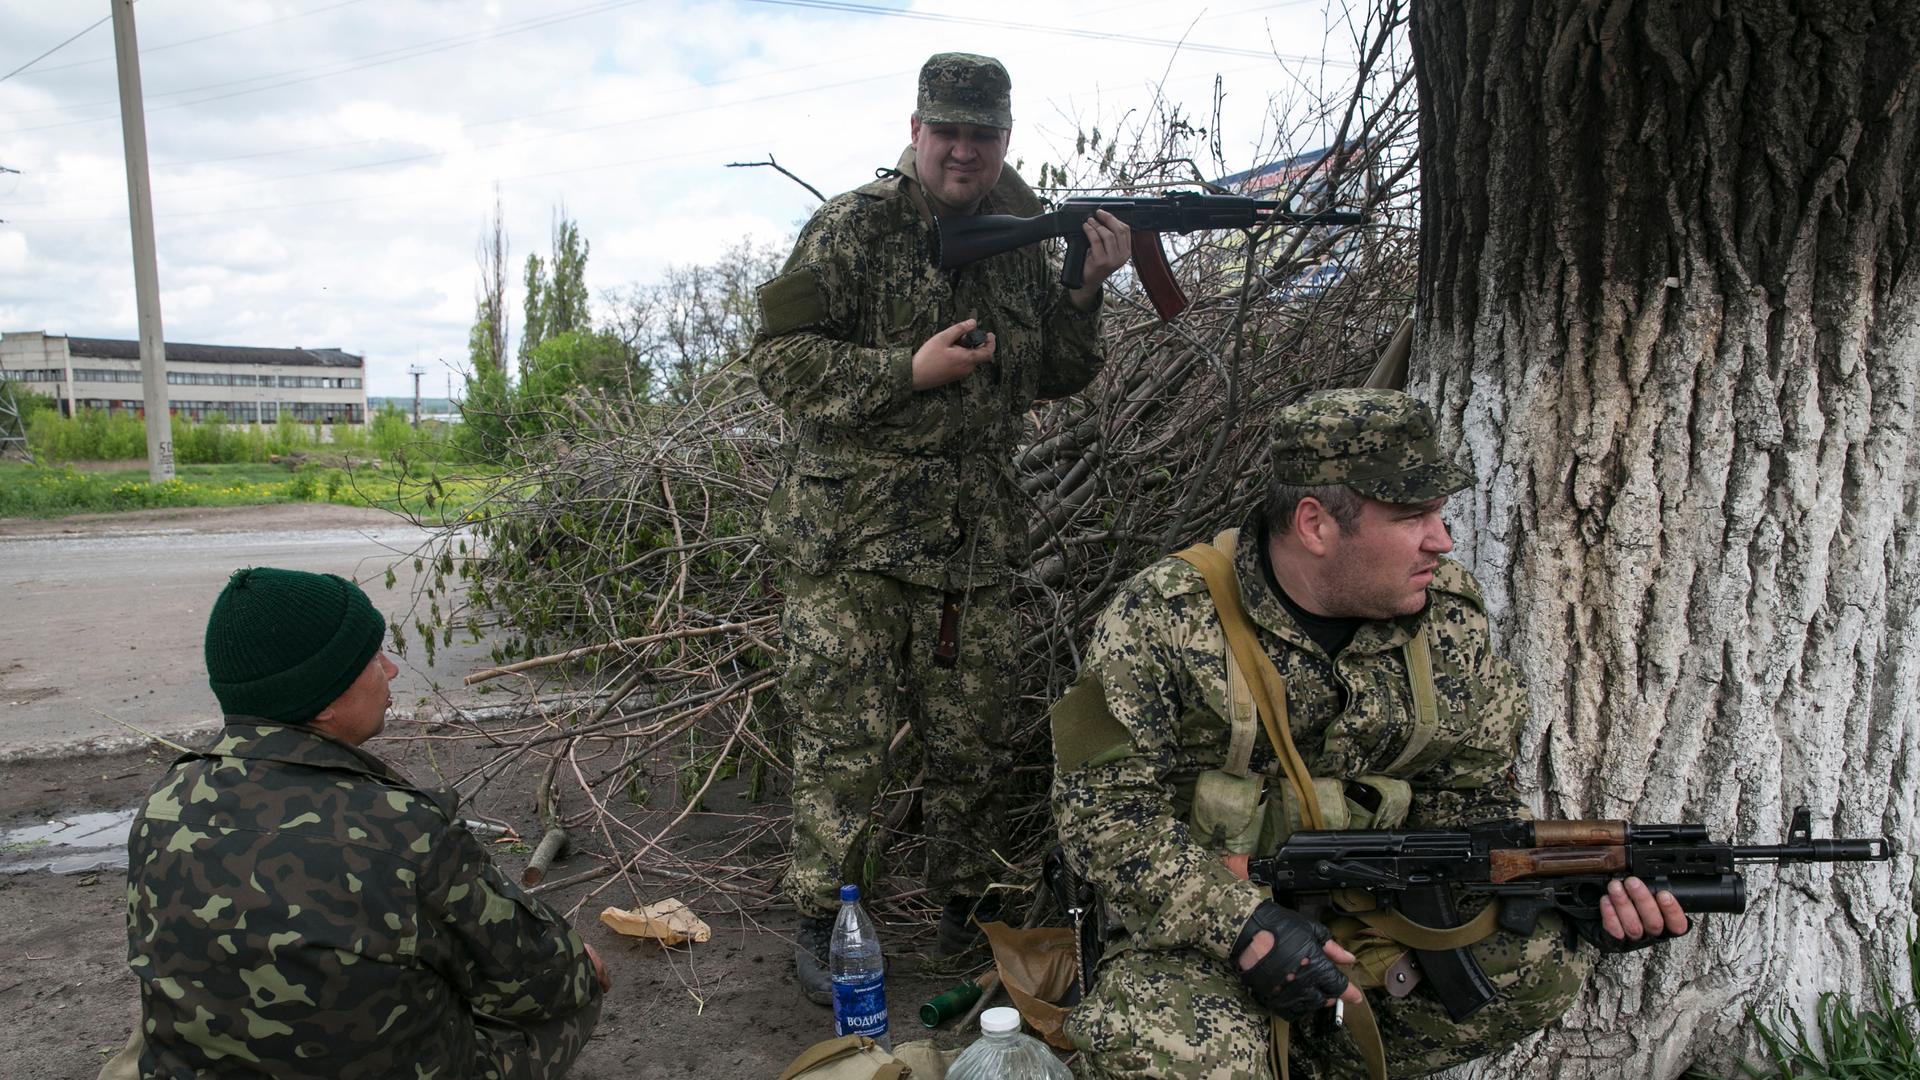 Pro-Russian armed men take positions near the town of Slaviansk, eastern Ukraine, May 5, 2014. Pro-Russian separatists ambushed Ukrainian forces on Monday, triggering heavy fighting on the outskirts of the rebel stronghold of Slaviansk, Interior Minister 